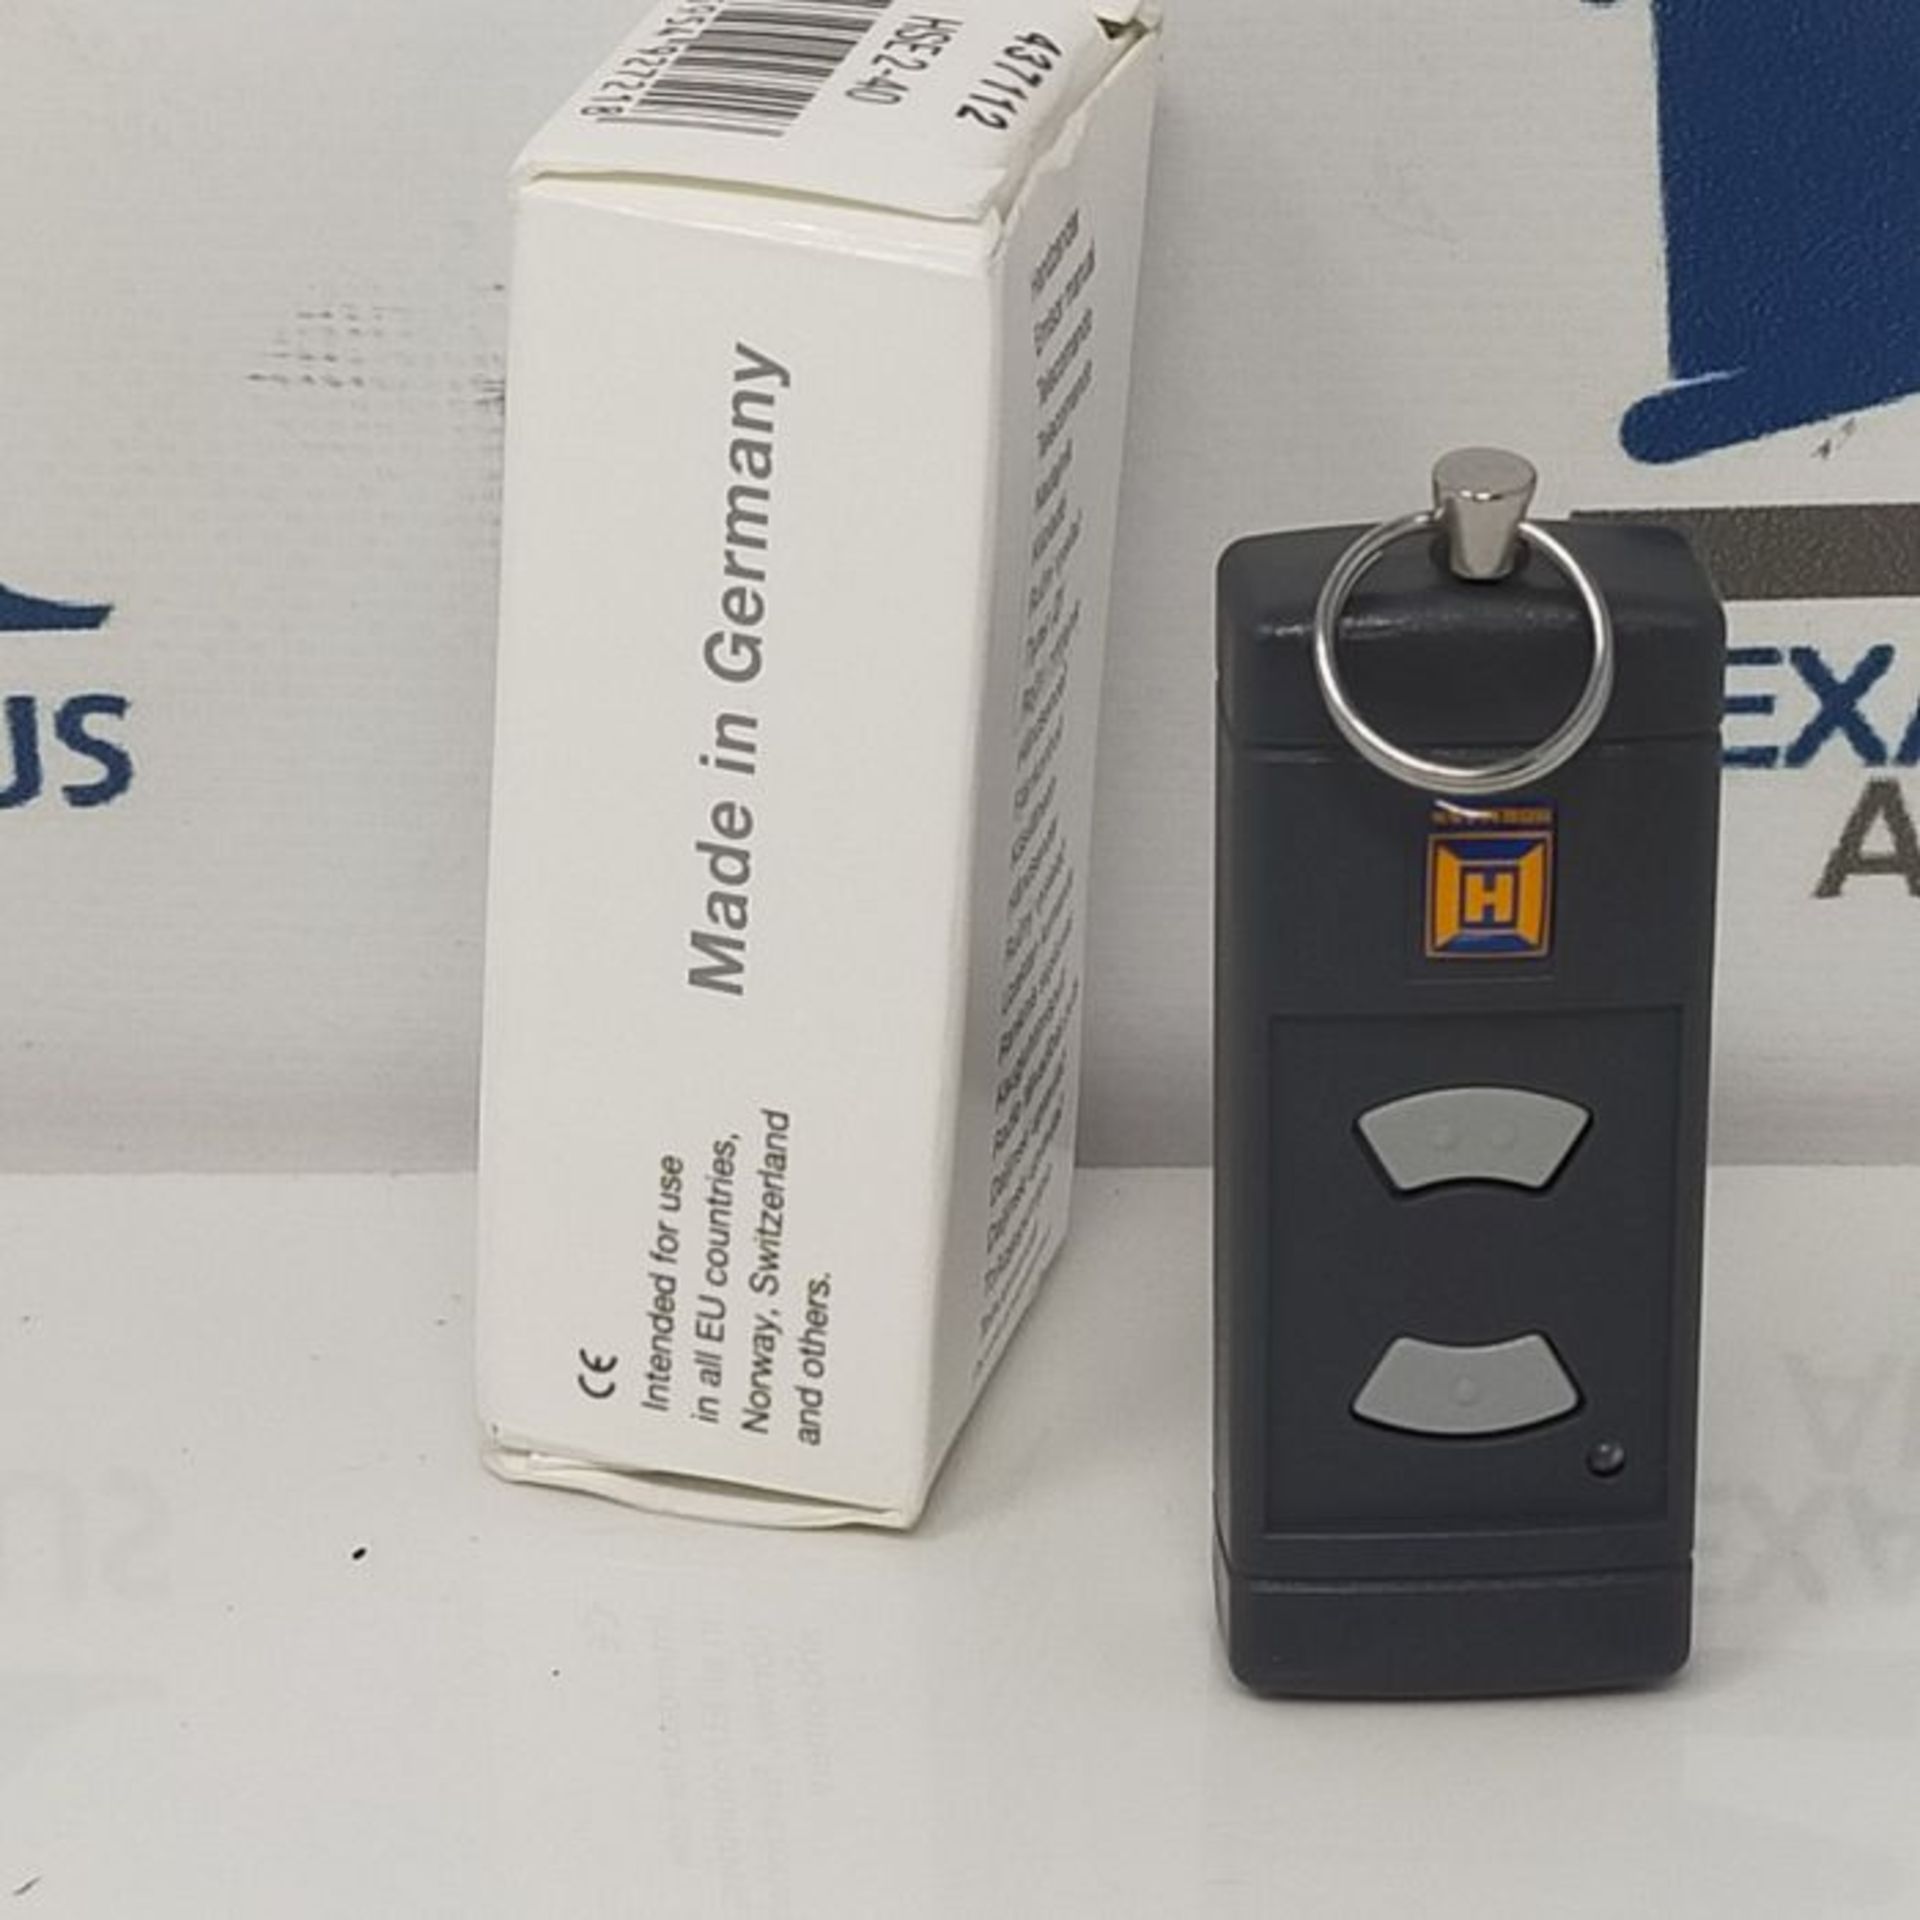 RRP £58.00 Hörmann Hand-Held Transmitter HSE2 40,685 Mhz Remote Control Smaller Than HSM - Image 2 of 3